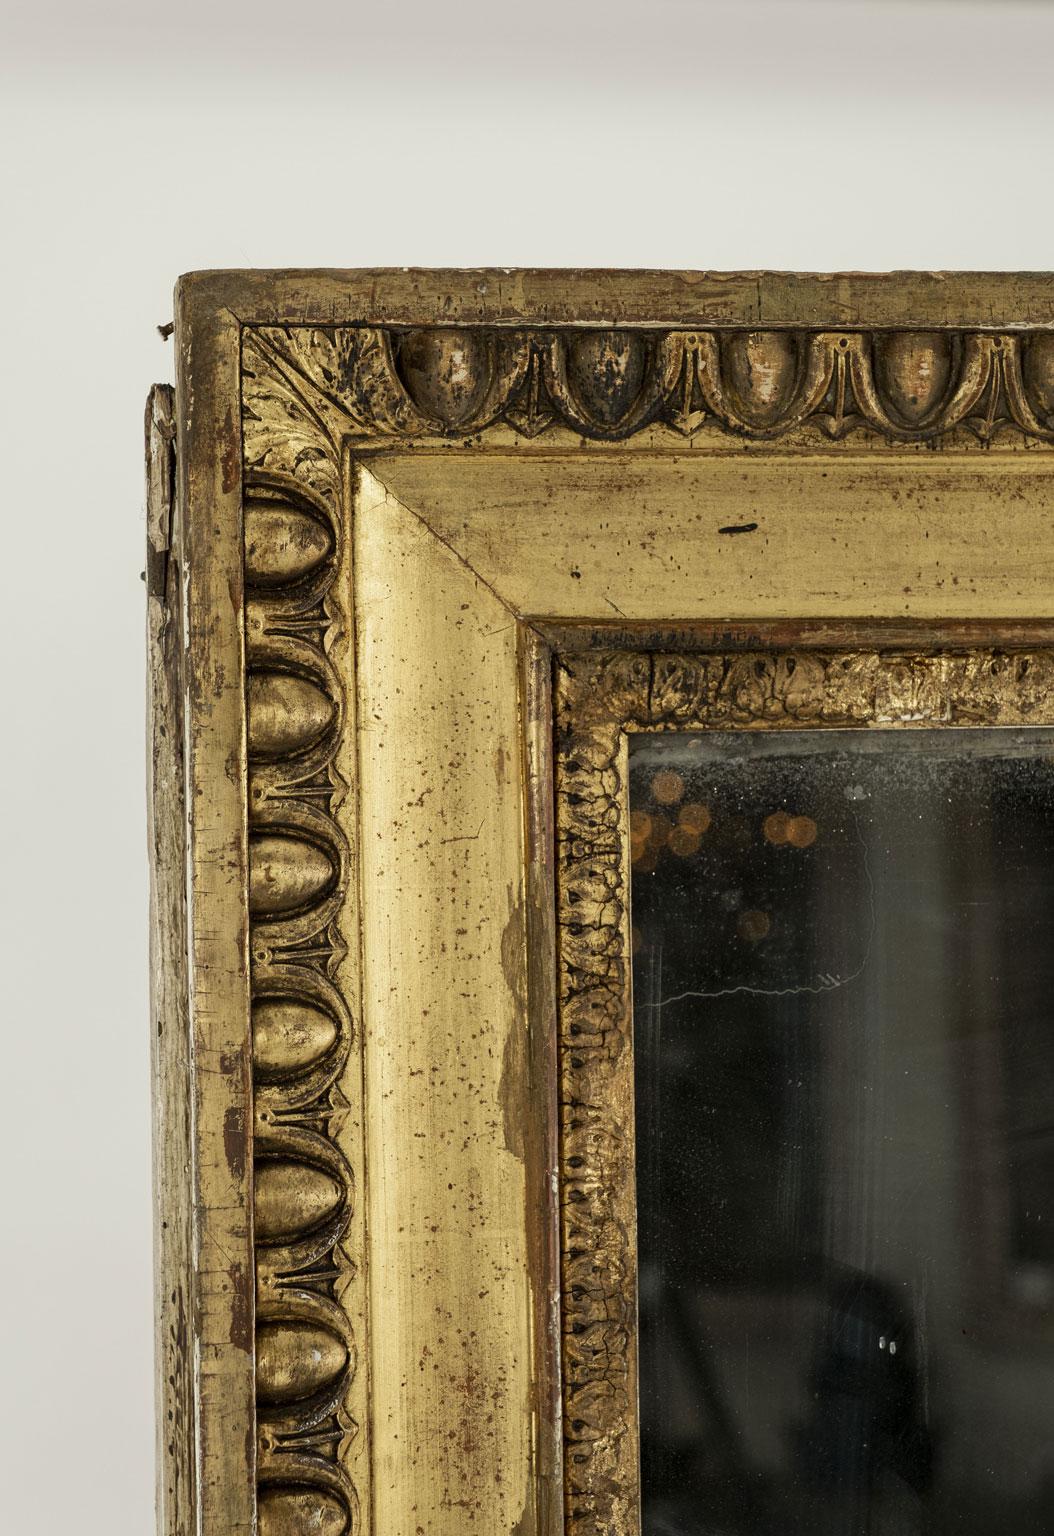 Large 19th century French giltwood mirror with egg and dart decoration. Original - or early - mercury mirror plate with small losses of silvering on reverse. Small amounts of subtle diamond dust effect around edges.